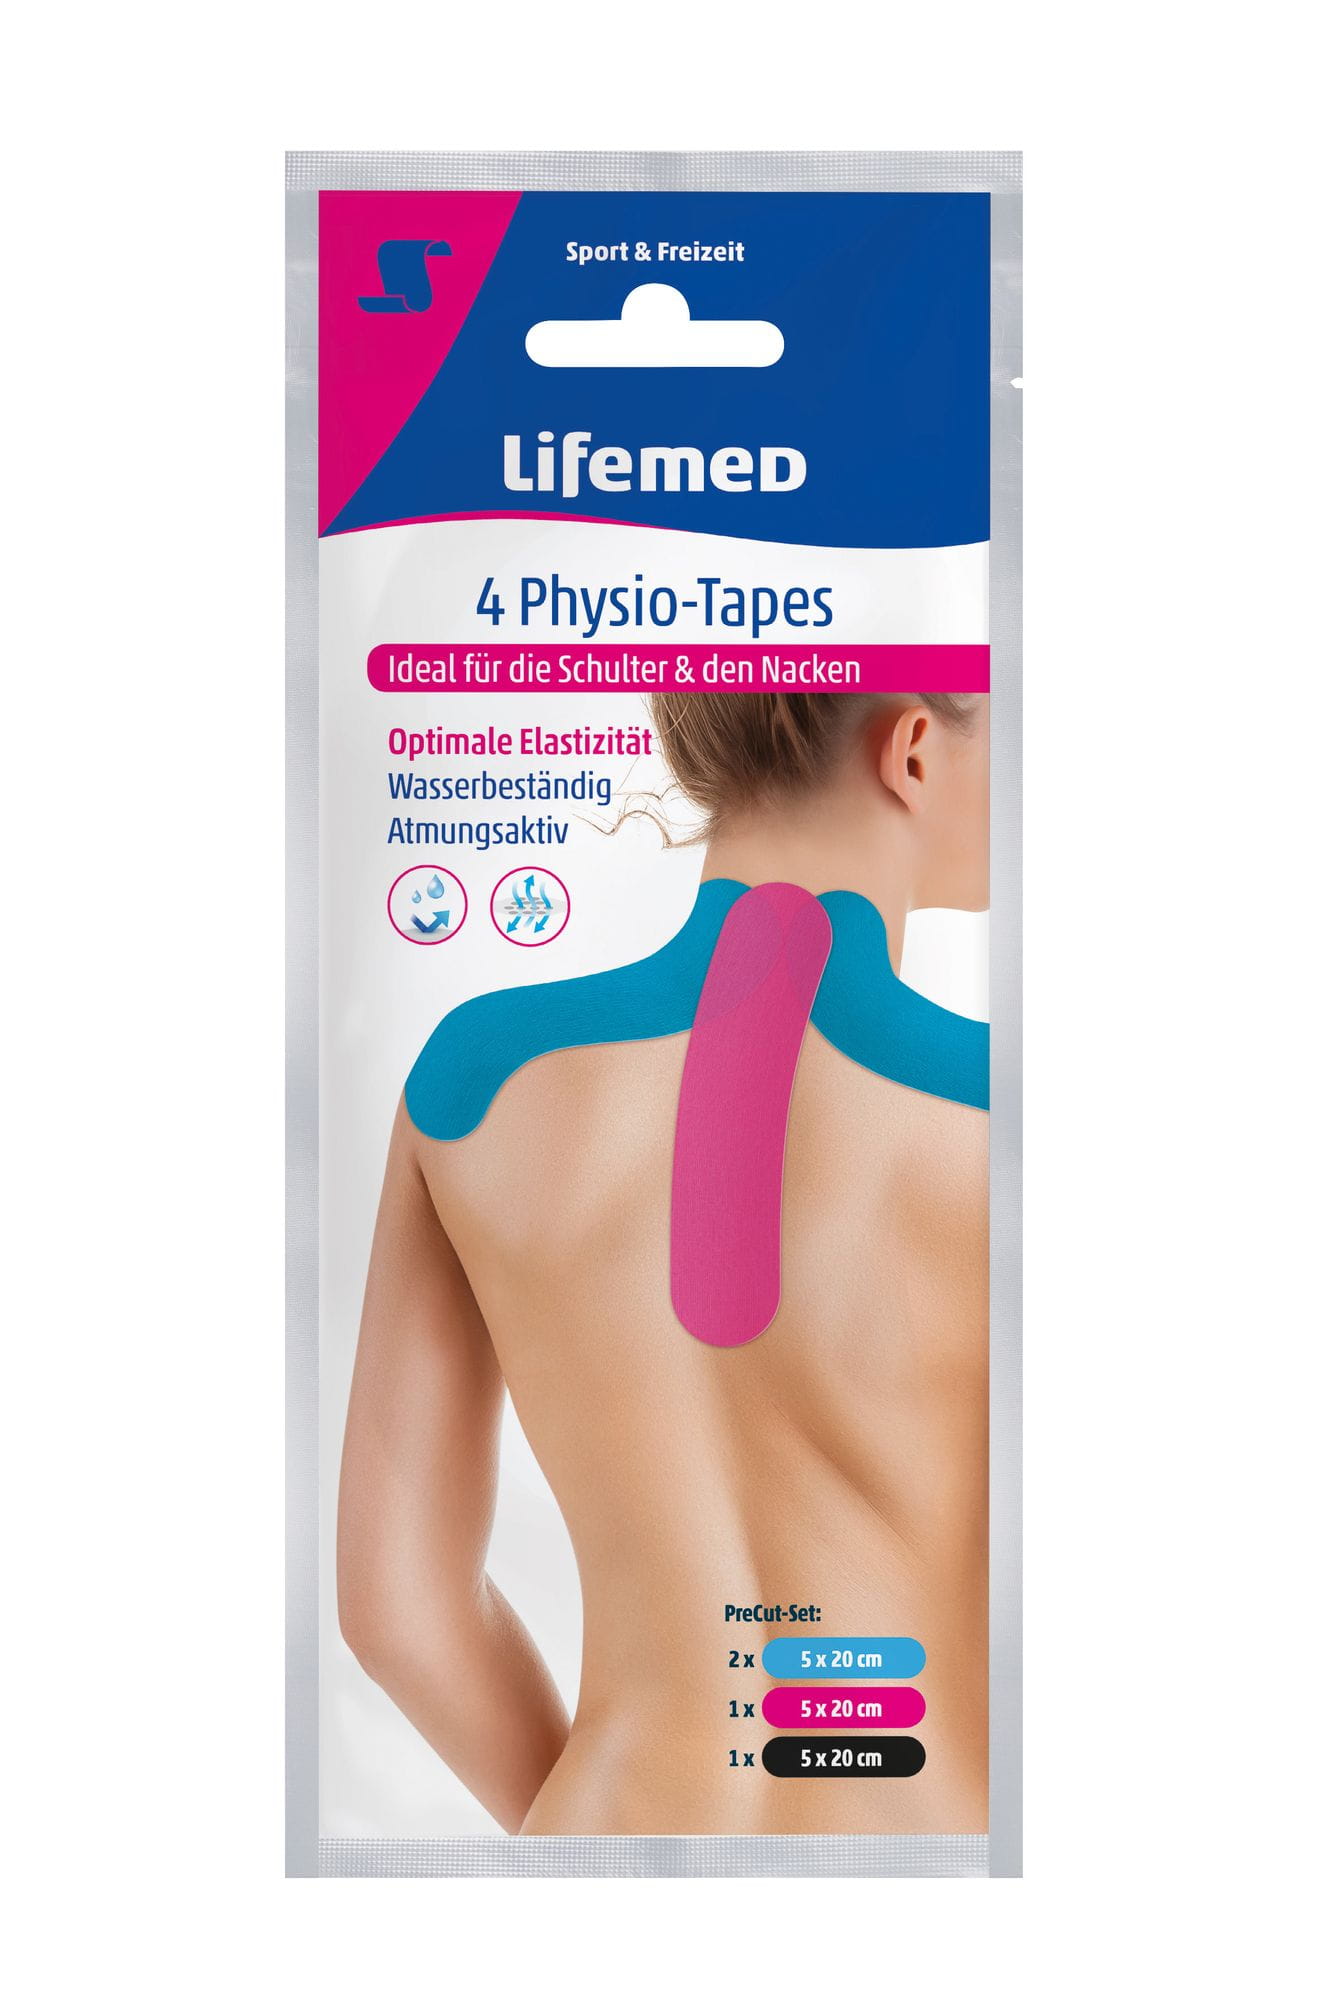 4 Lifemed Physio-Tapes 20 cm x 5 cm farbig sortiert Nacken